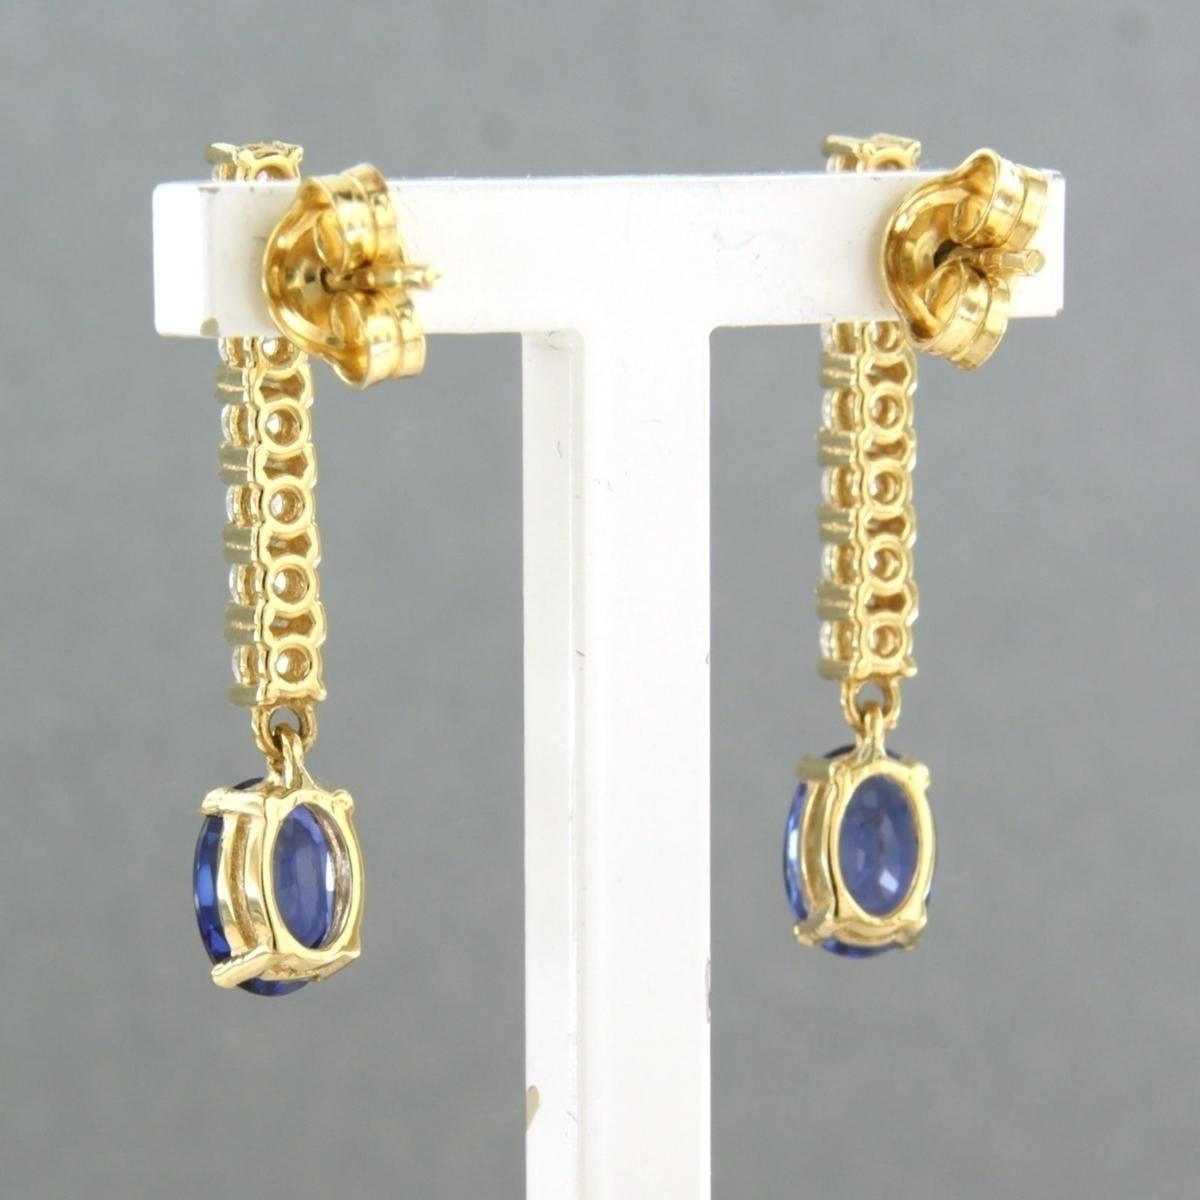 Brilliant Cut Earrings set with sapphire and diamonds 18k yellow gold